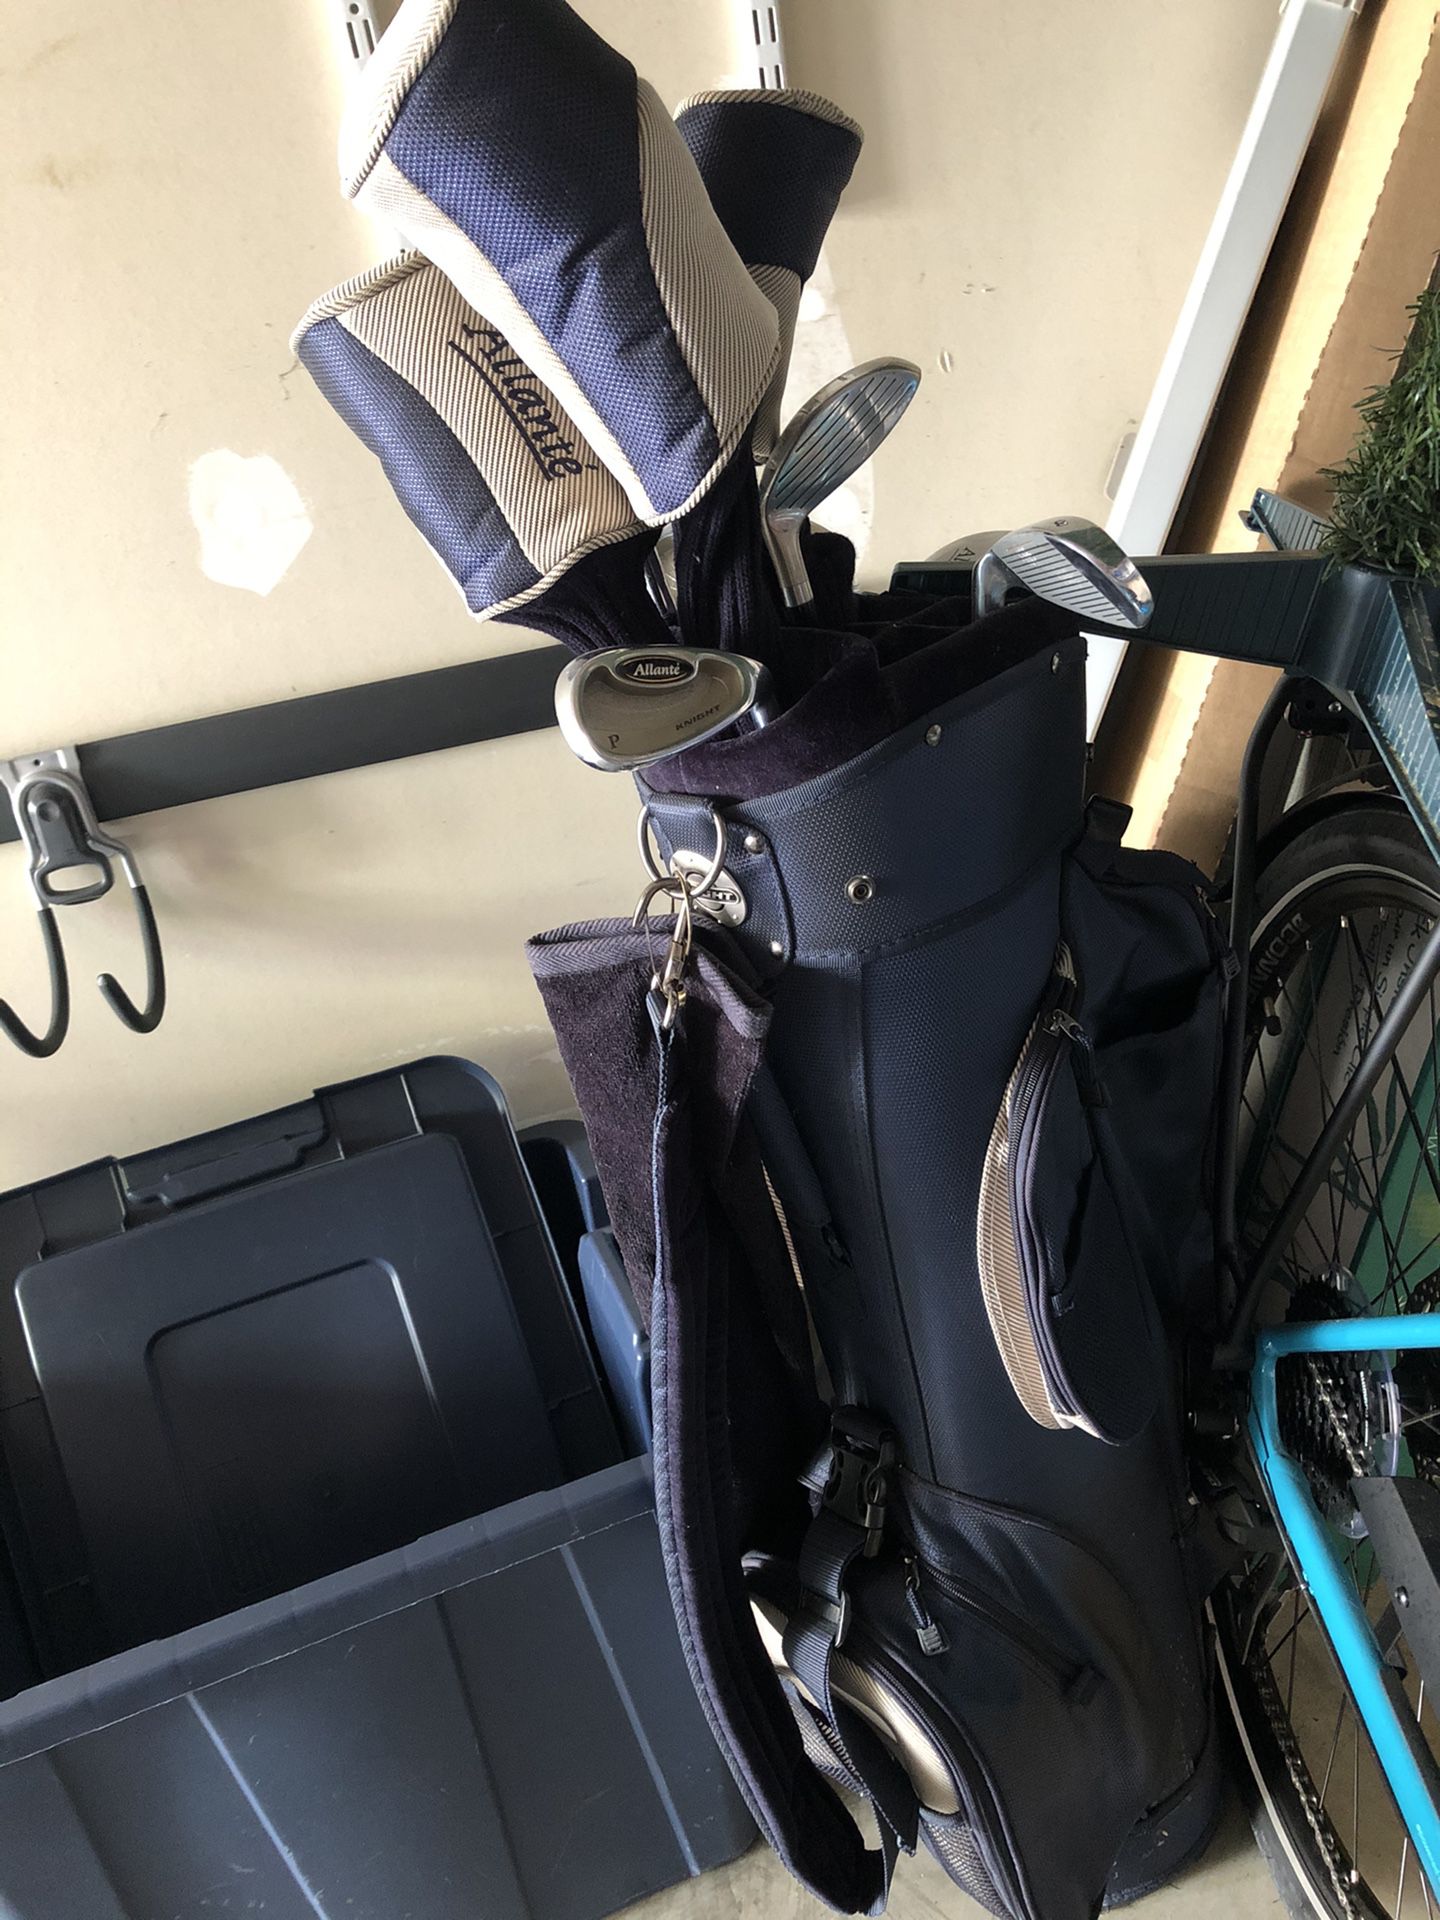 Golf clubs - women’s right handed